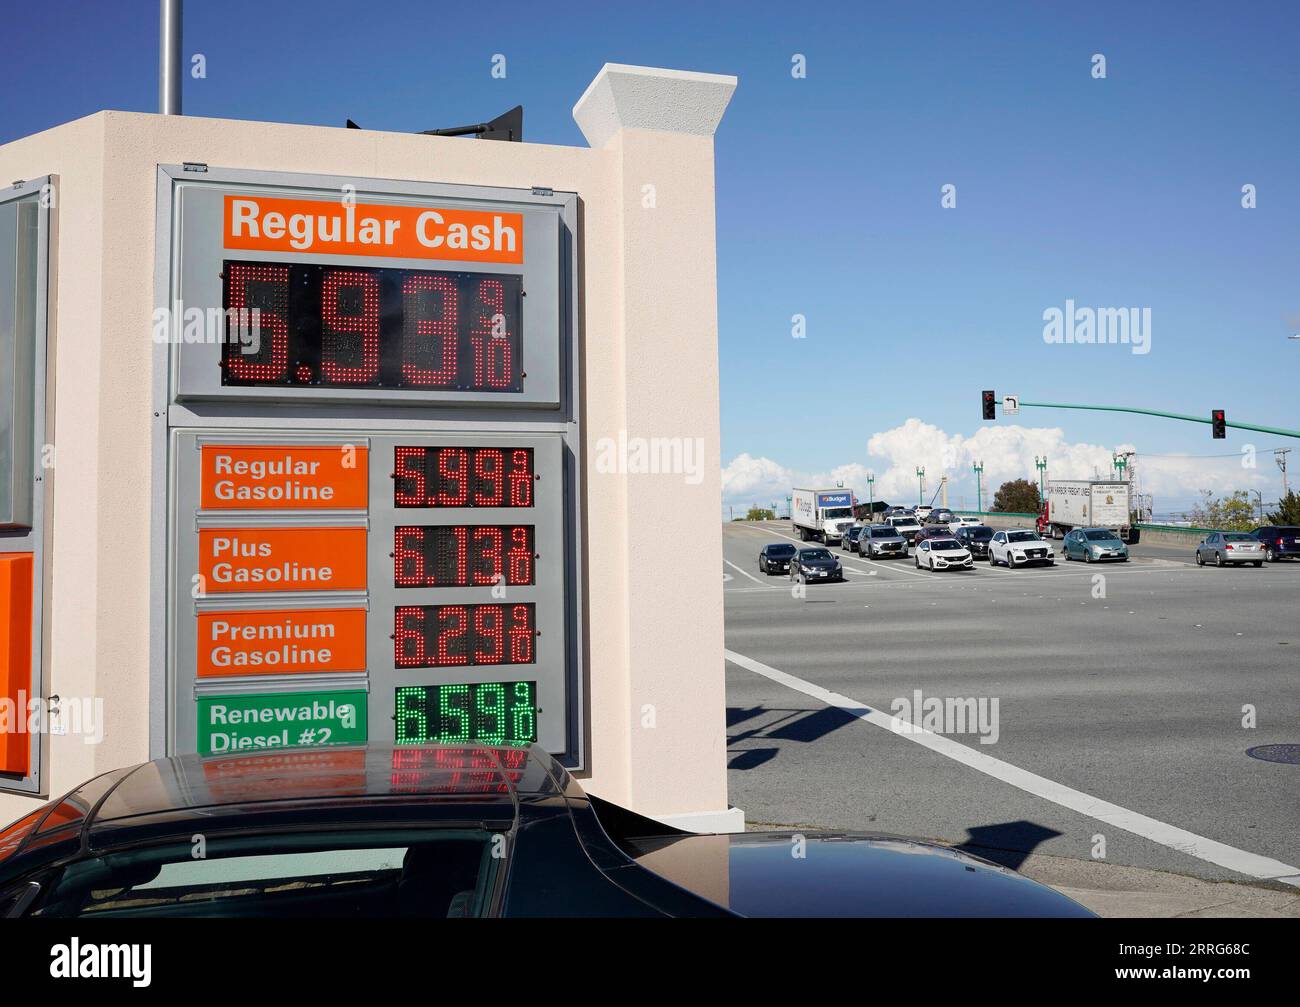 220511 -- MILLBRAE, May 11, 2022 -- Gasoline and diesel prices are displayed at a gas station in Millbrae, California, the United States, May 10, 2022. The national average prices for regular gasoline and diesel in the United States both climbed to fresh record highs Tuesday. According to the American Automobile Association AAA, which provides the latest gas price analysis based on data from 130,000 gas stations nationwide, the regular gas price rose four cents on Tuesday to 4.37 U.S. dollars a gallon, overtaking the prior record of 4.33 dollars on March 11. Photo by /Xinhua U.S.-CALIFORNIA-MI Stock Photo